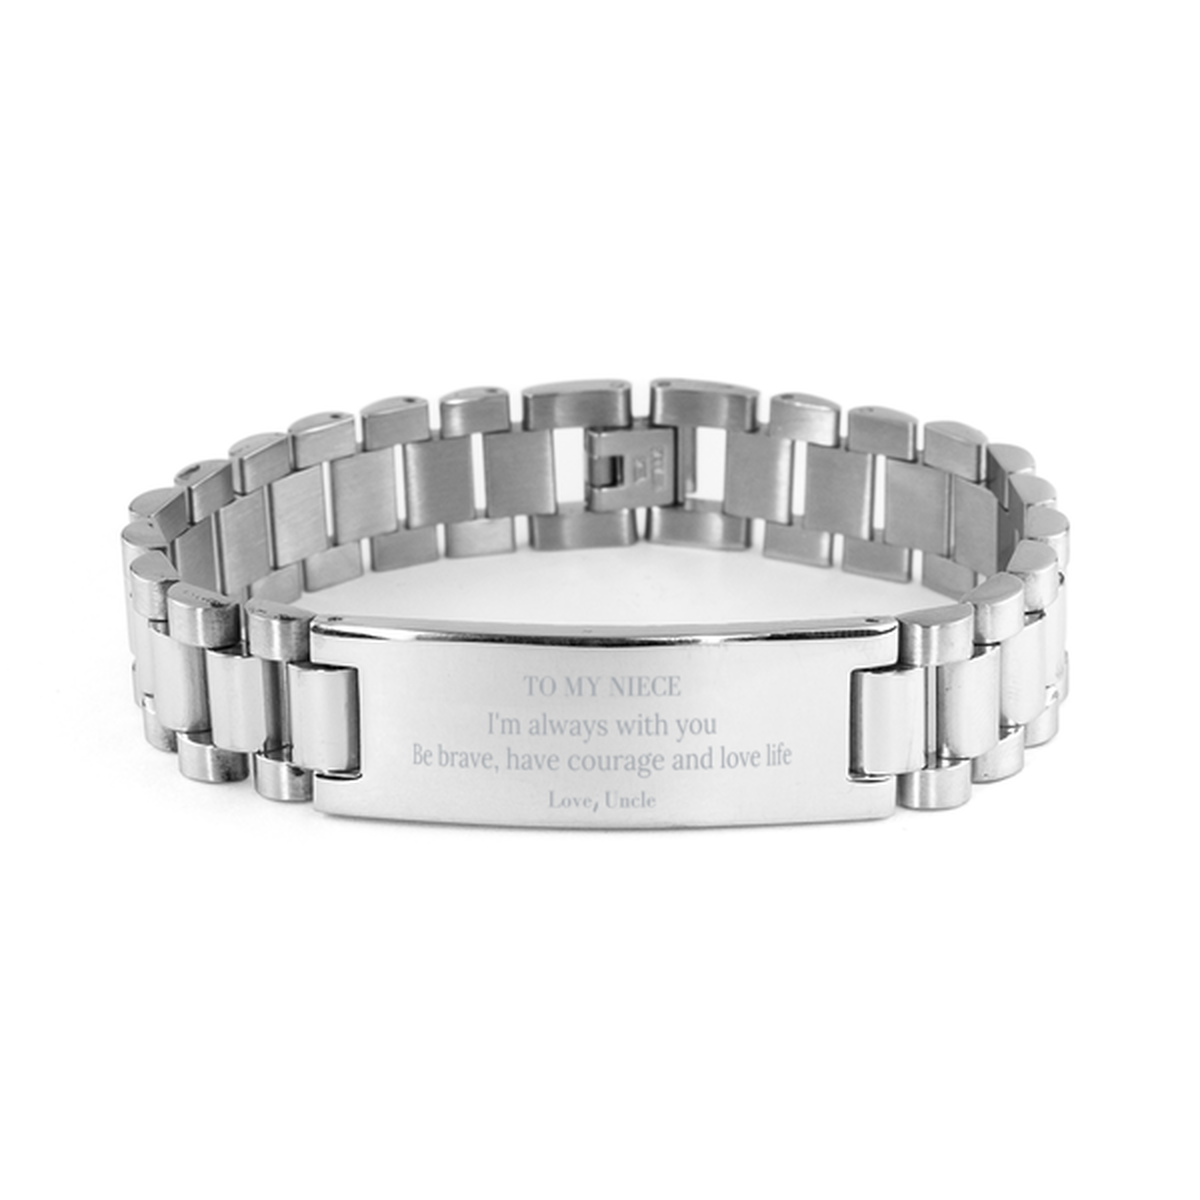 To My Niece Gifts from Uncle, Unique Ladder Stainless Steel Bracelet Inspirational Christmas Birthday Graduation Gifts for Niece I'm always with you. Be brave, have courage and love life. Love, Uncle